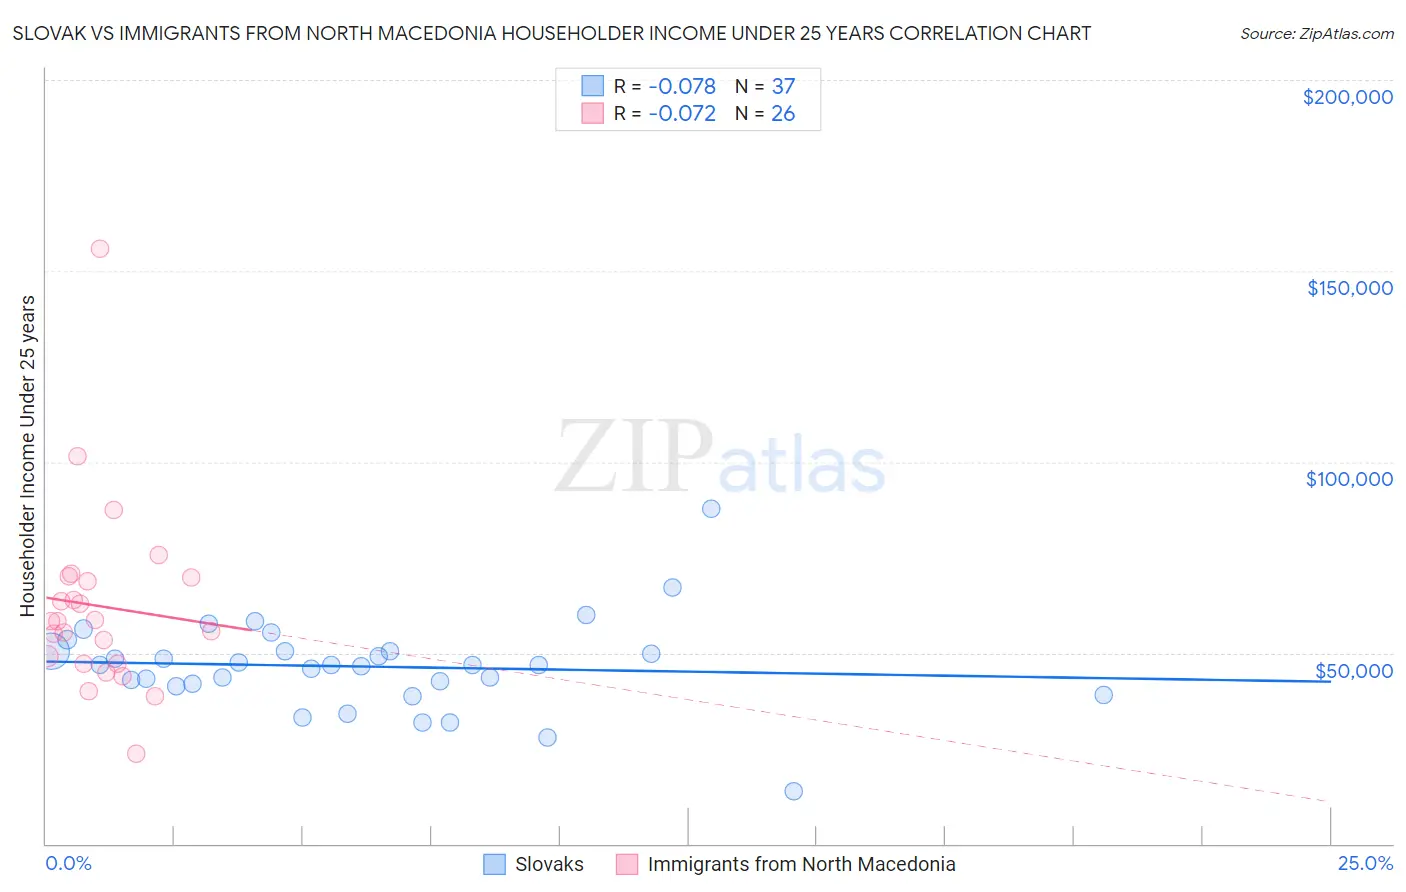 Slovak vs Immigrants from North Macedonia Householder Income Under 25 years